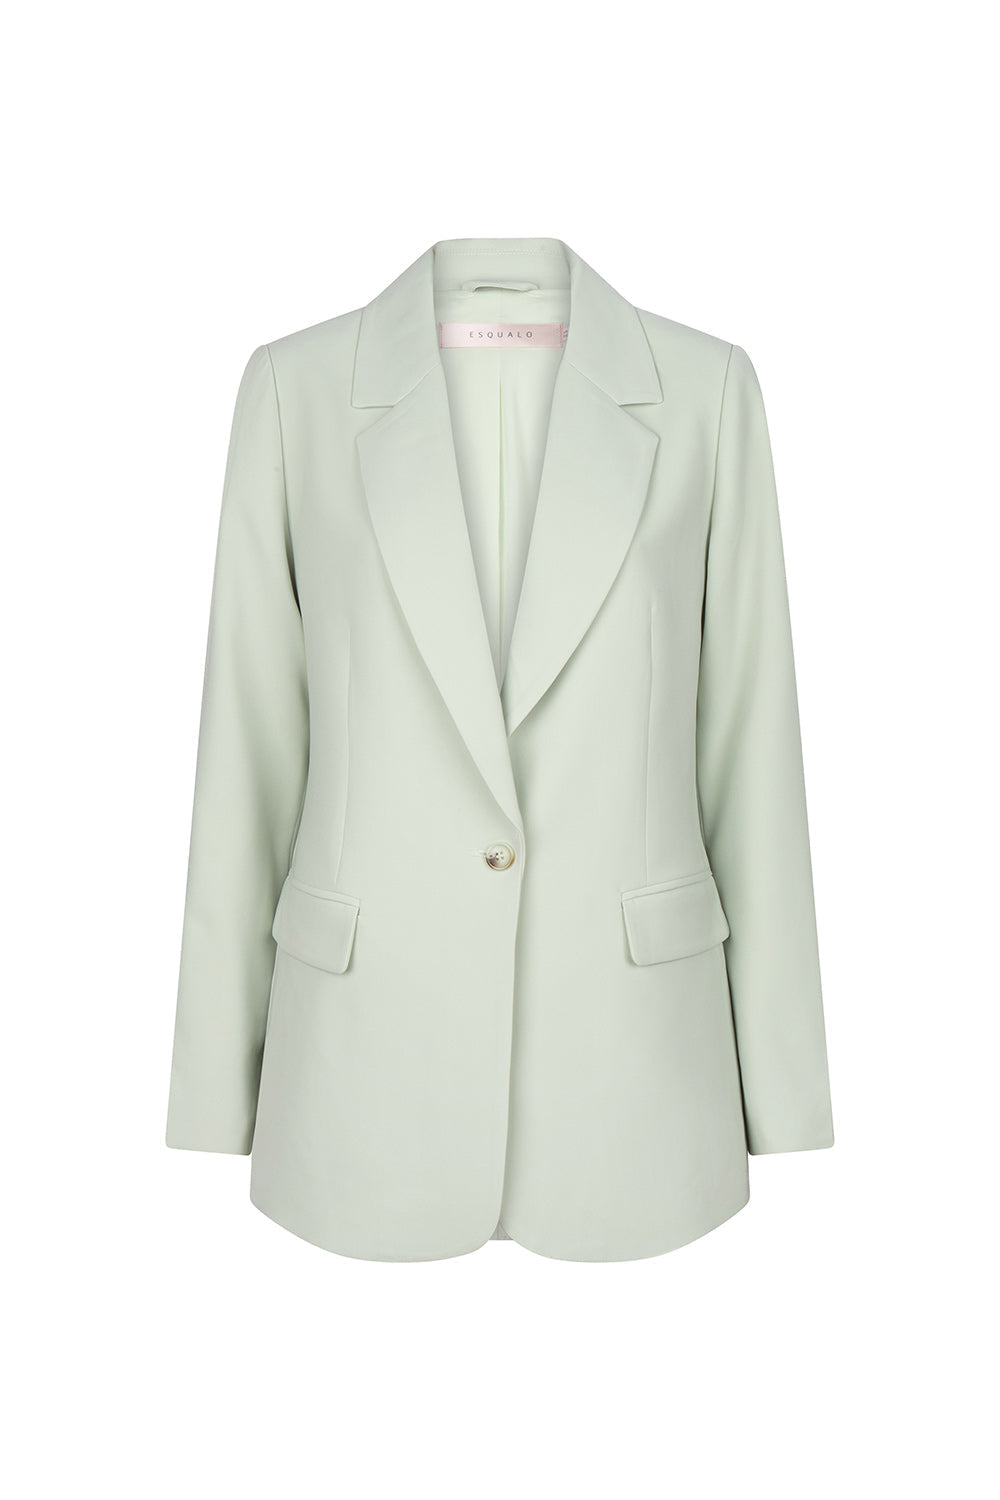 Esqualo (SP2410022) Women's Long Sleeve Tailored Blazer with Notch Collar, Single Button Close, and Front Pockets in Pistachio green